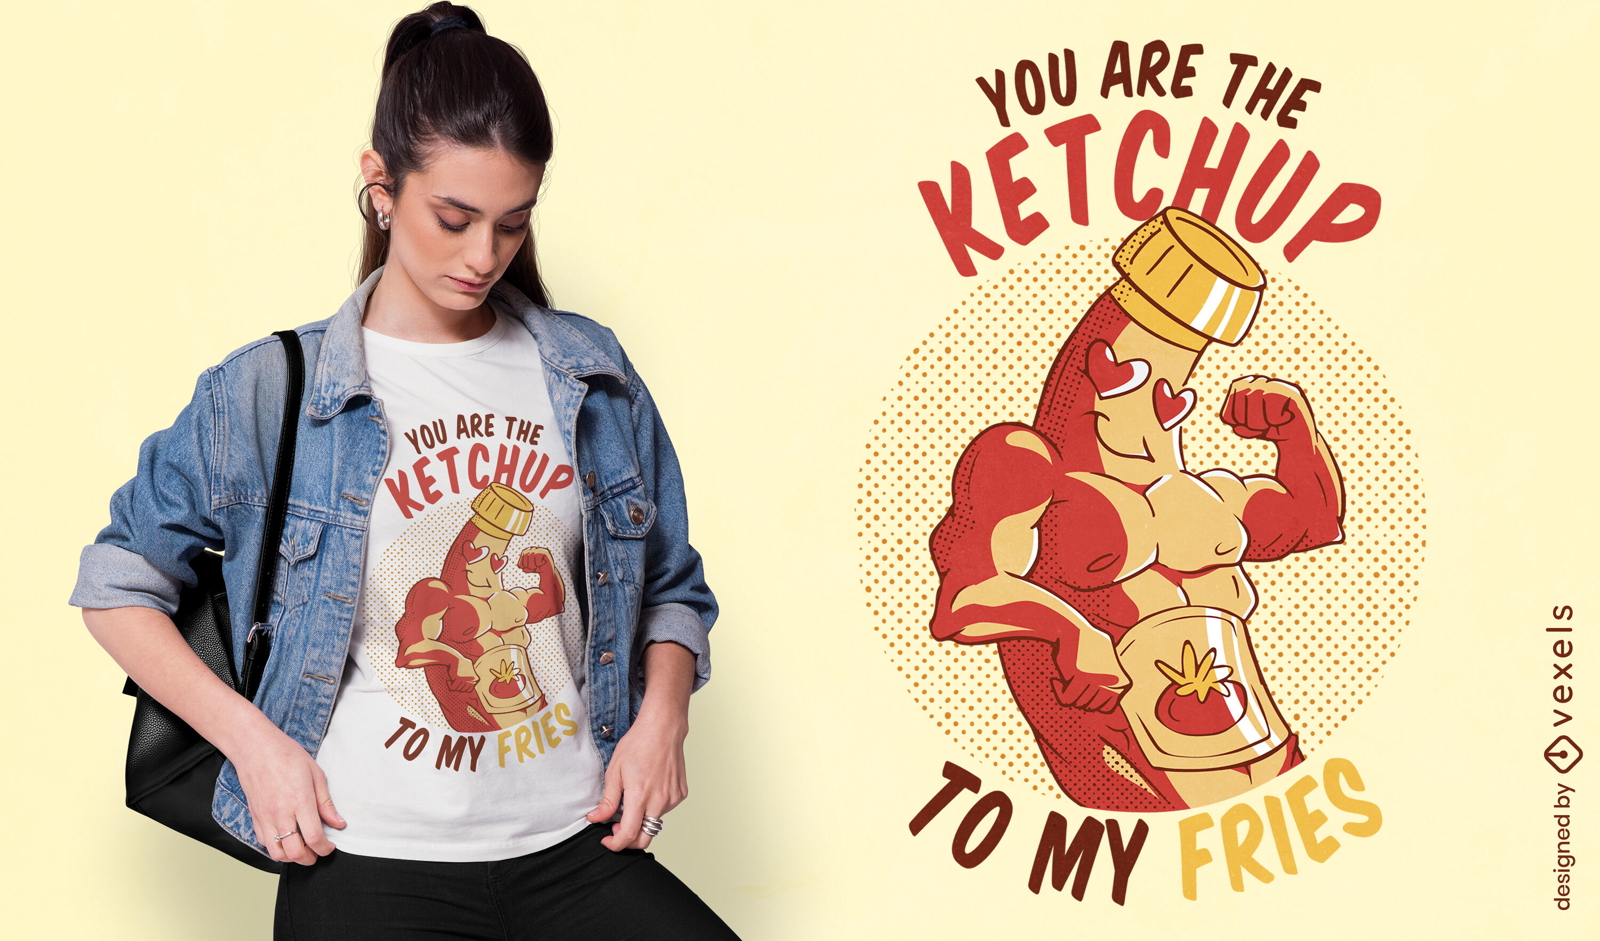 Ketchup and fries funny quote t-shirt design